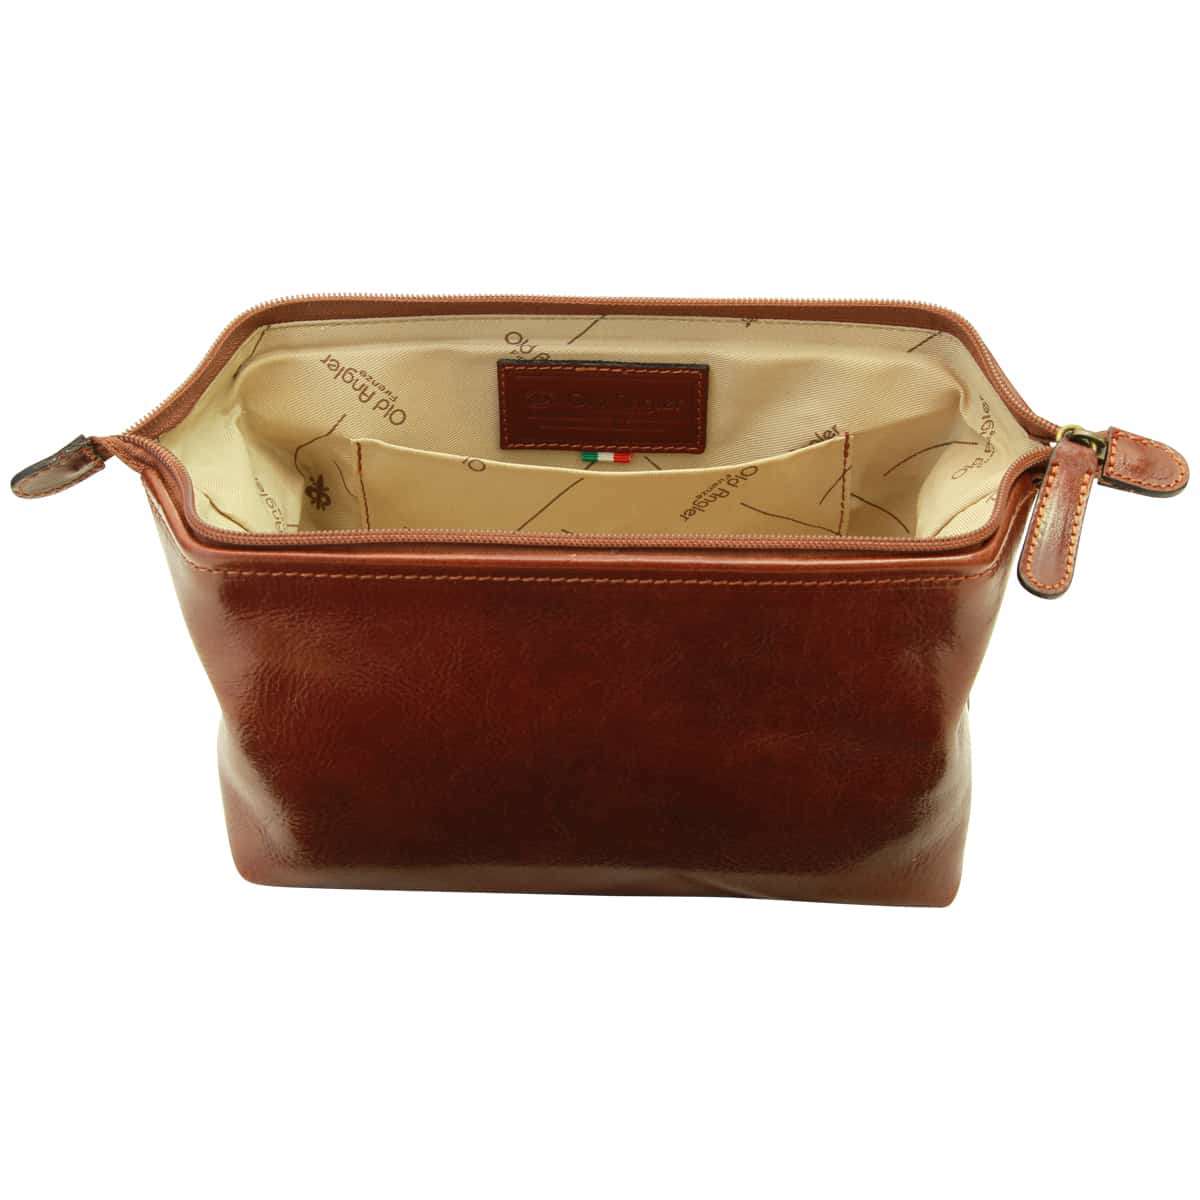 Cowhide beauty case - Brown | 401205MA US | Old Angler Firenze